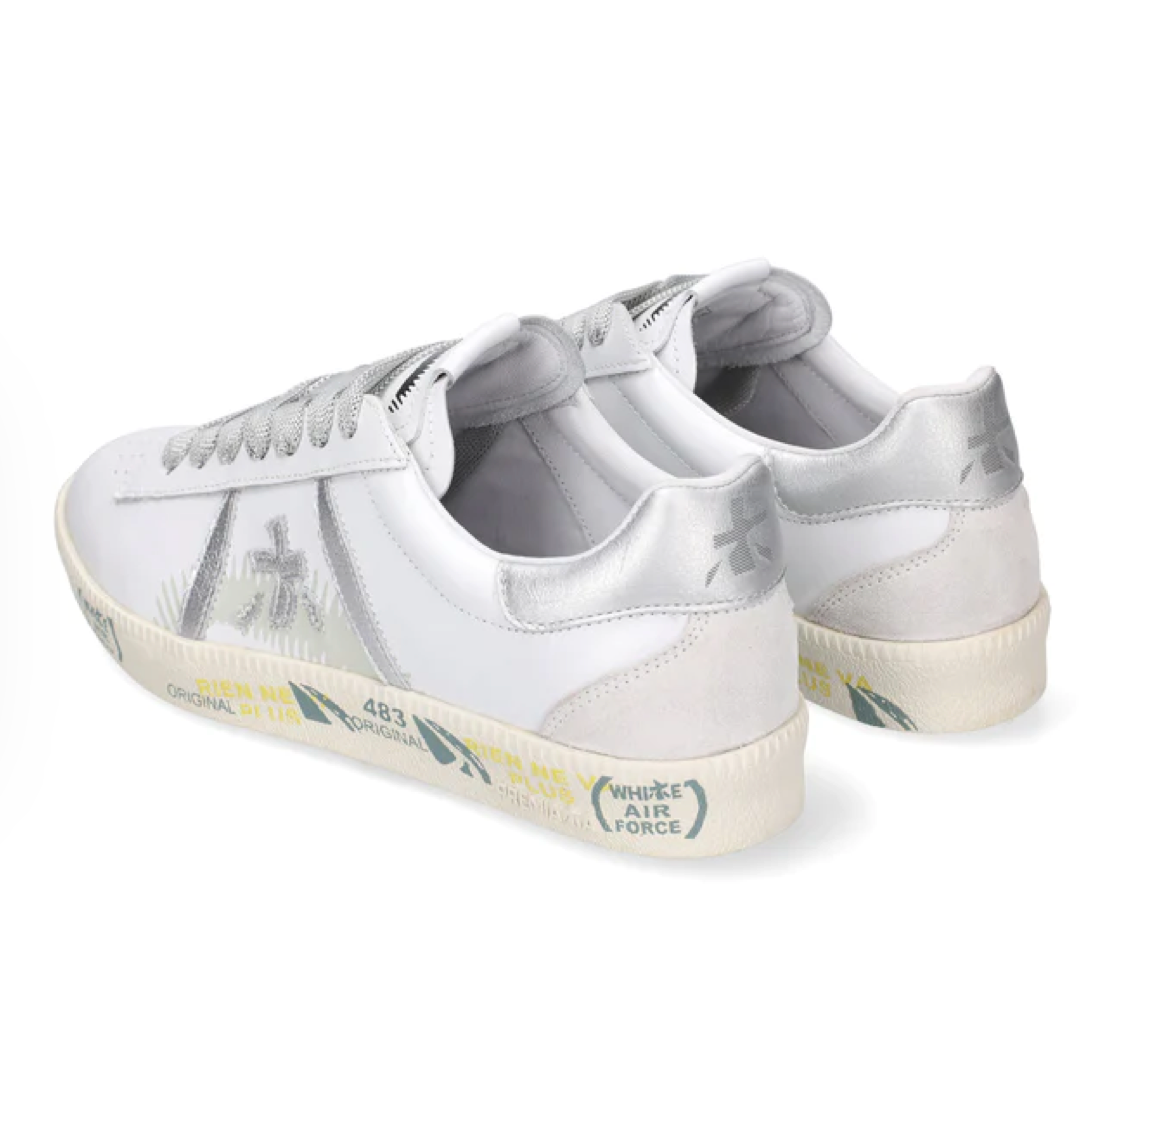 Andy D Sneakers